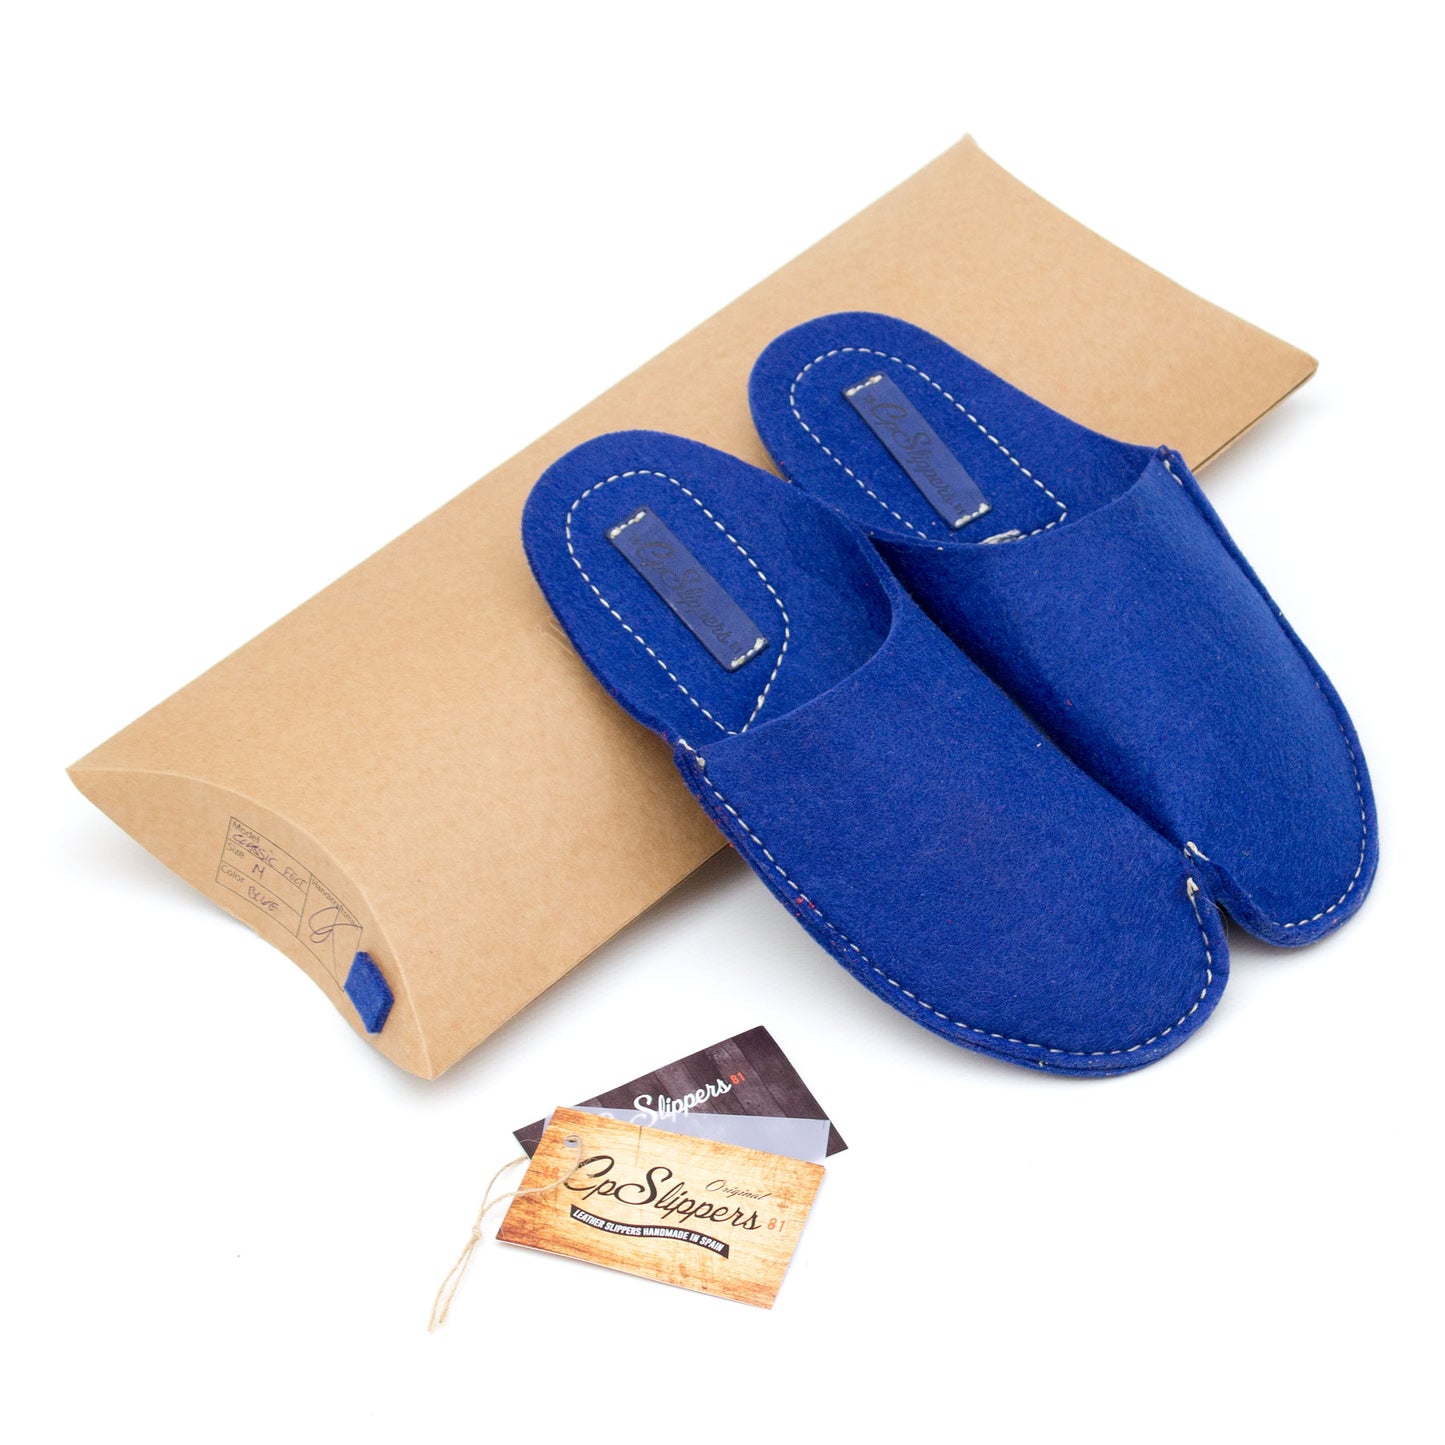 Blue CP Slippers Classic - CP Slippers